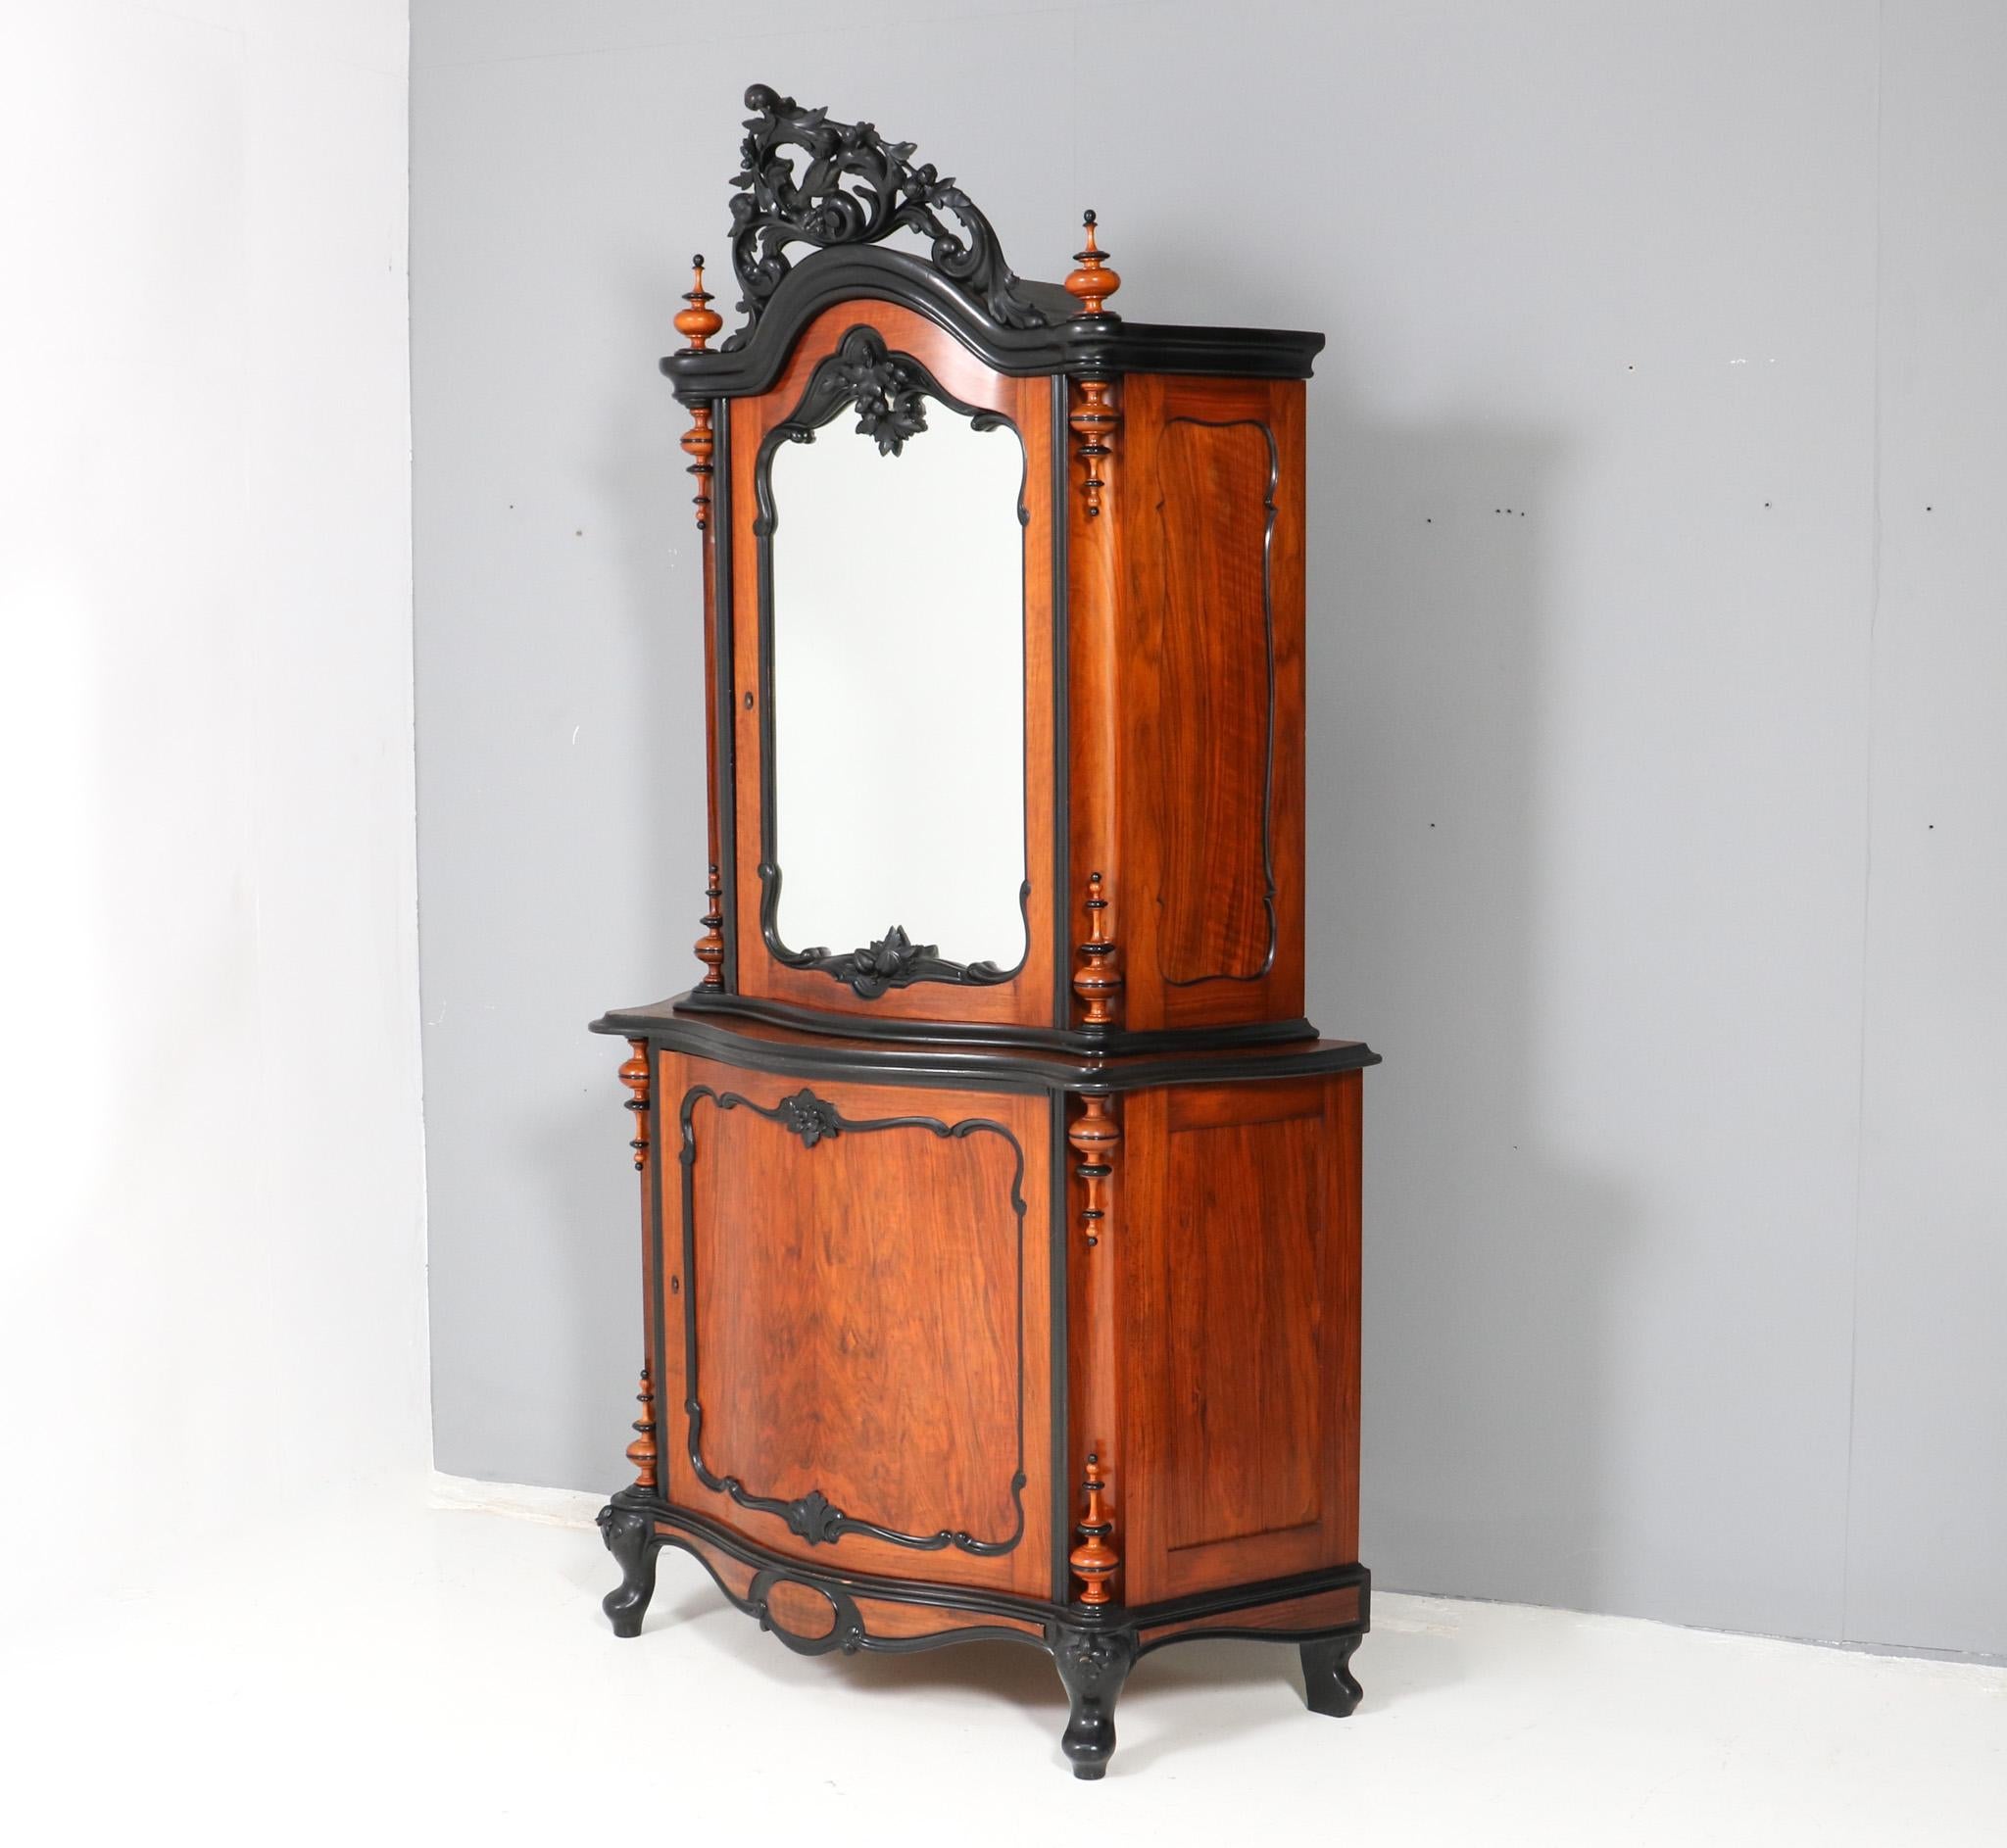 Magnificent and rare Victorian Willem III cabinet or bonheur.
The design and the quality of this high end piece is in the style of the famous Dutch cabinet maker Horrix Den Haag.
Striking Dutch design from the 1870s.
Solid walnut with original black